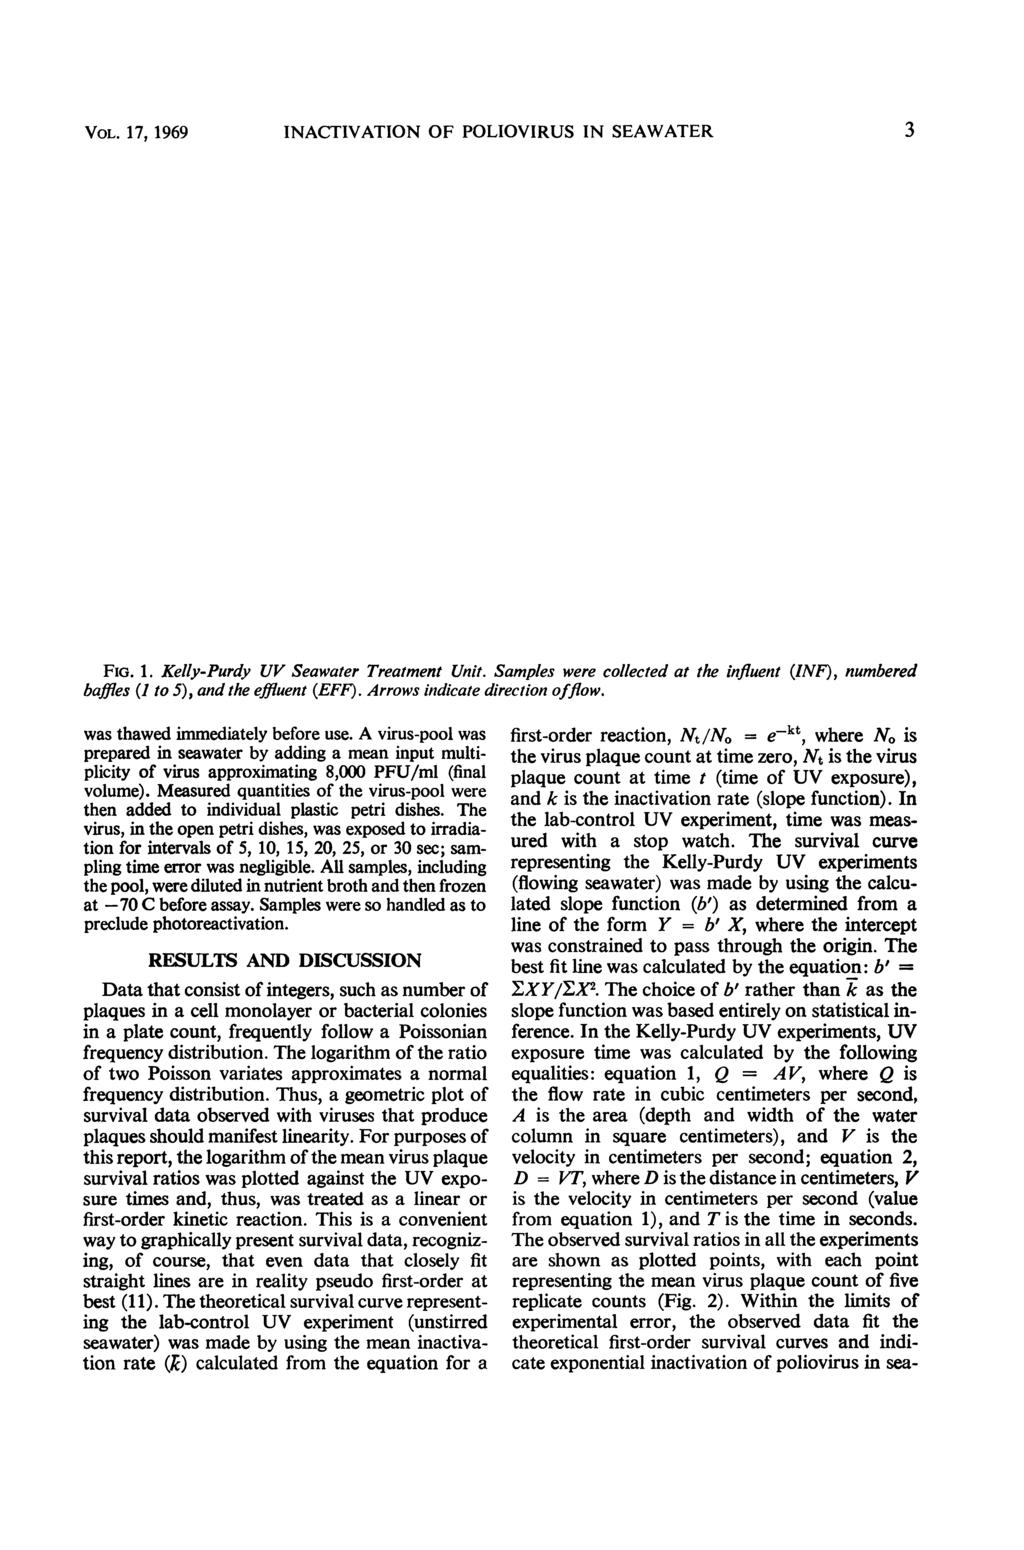 VOL. 17, 1969 INACTIVATION OF POLIOVIRUS IN SEAWATER 3 FIG. 1. Kelly-Purdy UV Seawater Treatment Unit. Samples were collected at the influent (INF), numbered baffles (I to 5), and the effluent (EFF).